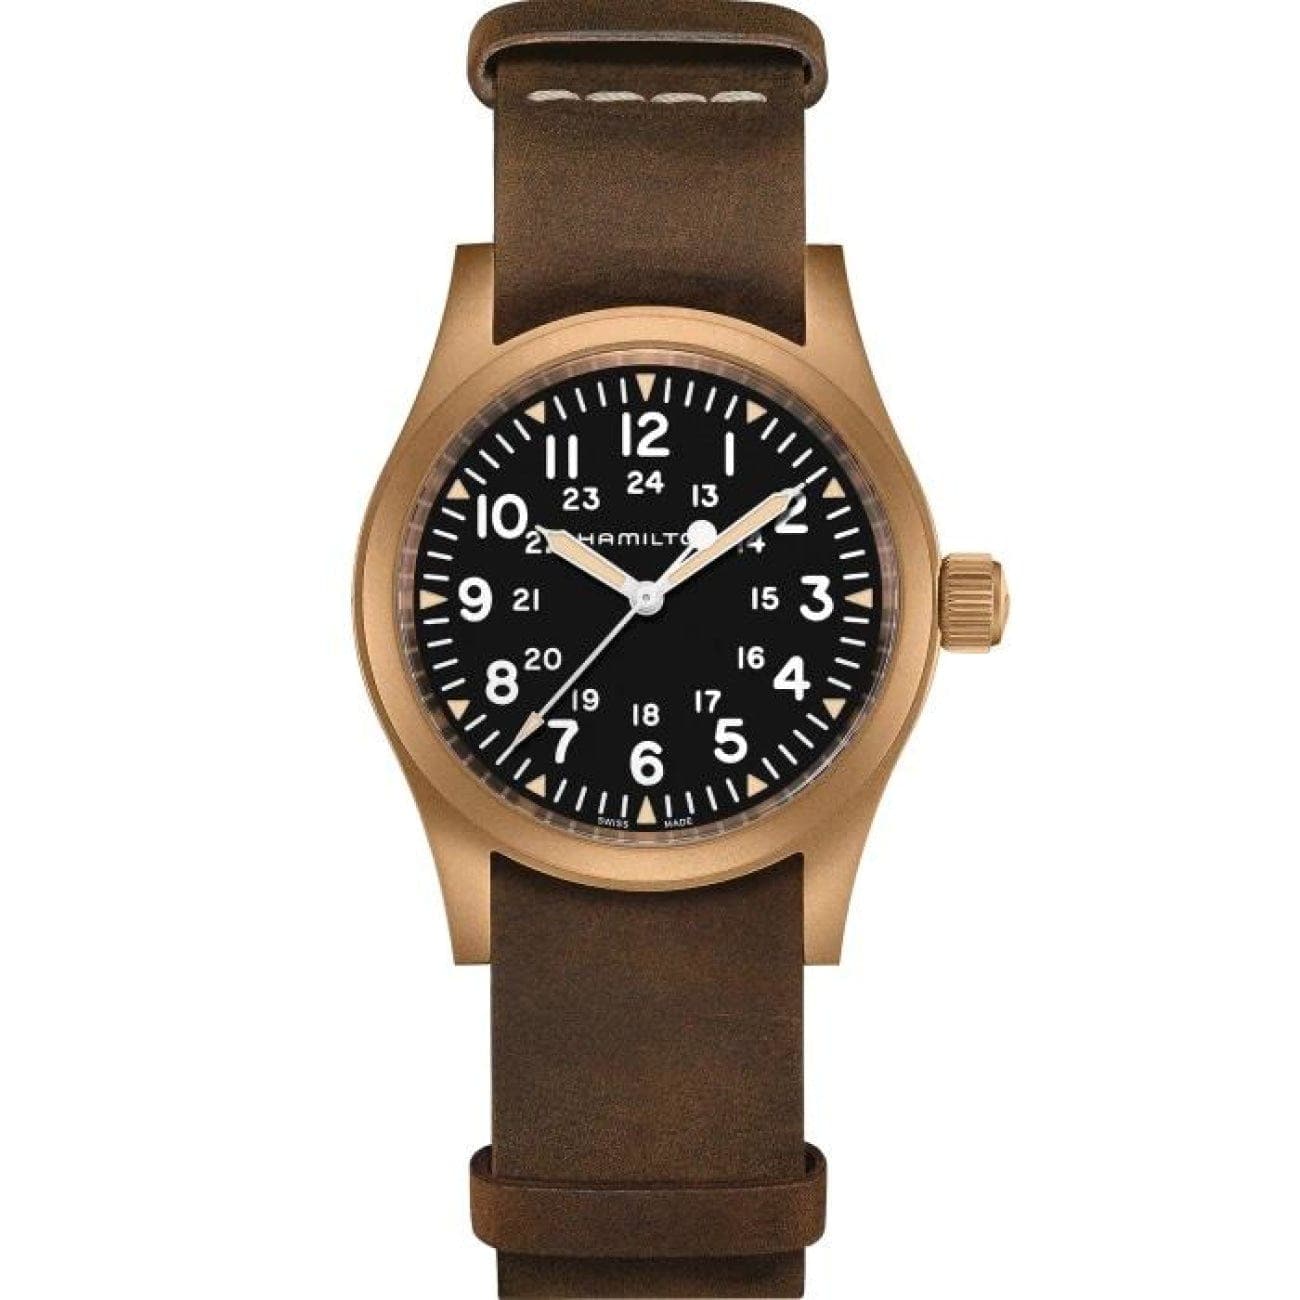 What Are Rubber B's Top 5 Bronze Watches? | Rubber B